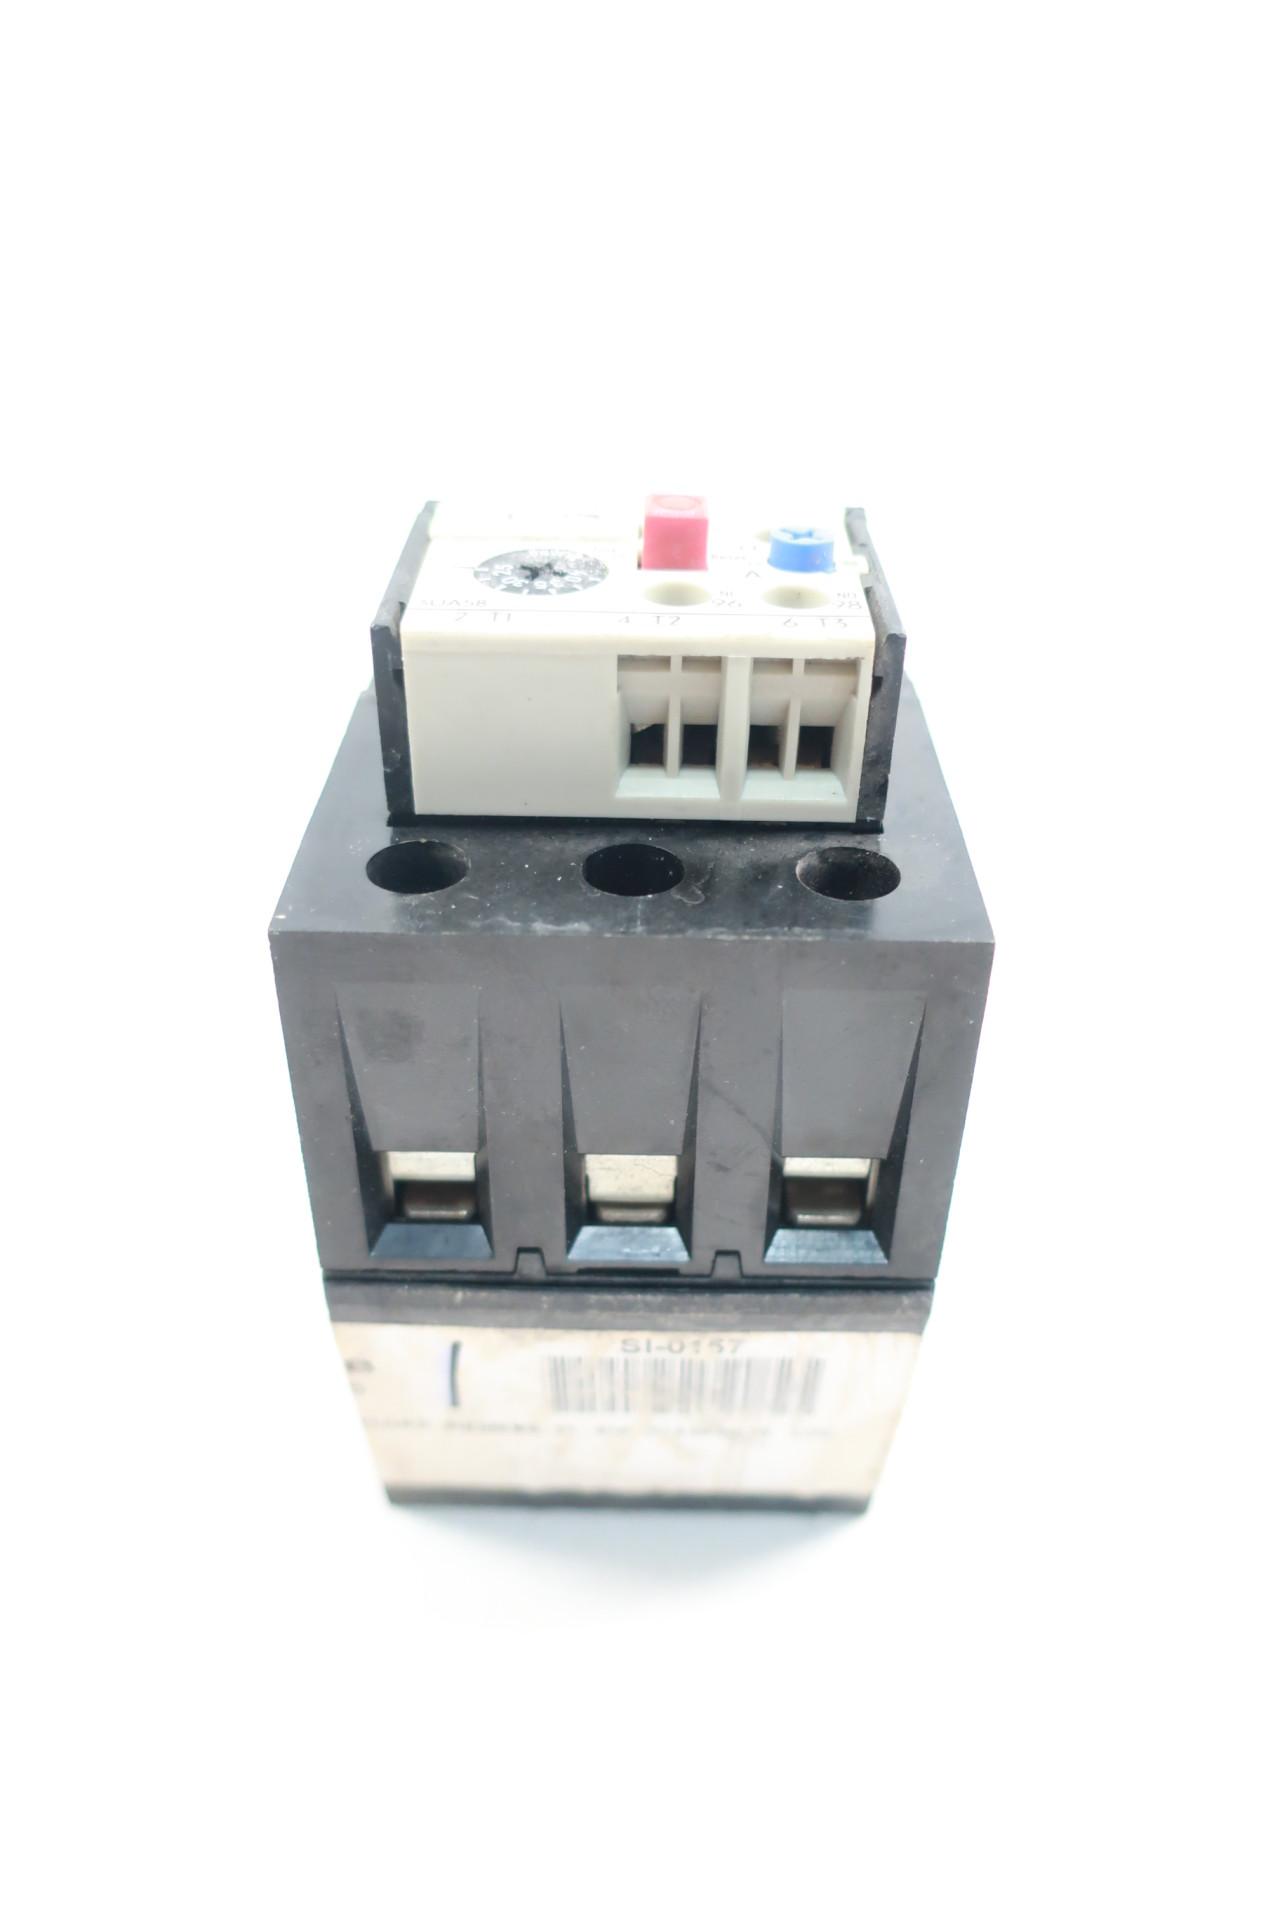 Details about   Siemens 3UA58 00-2T Overload Relay 40-57AMP 